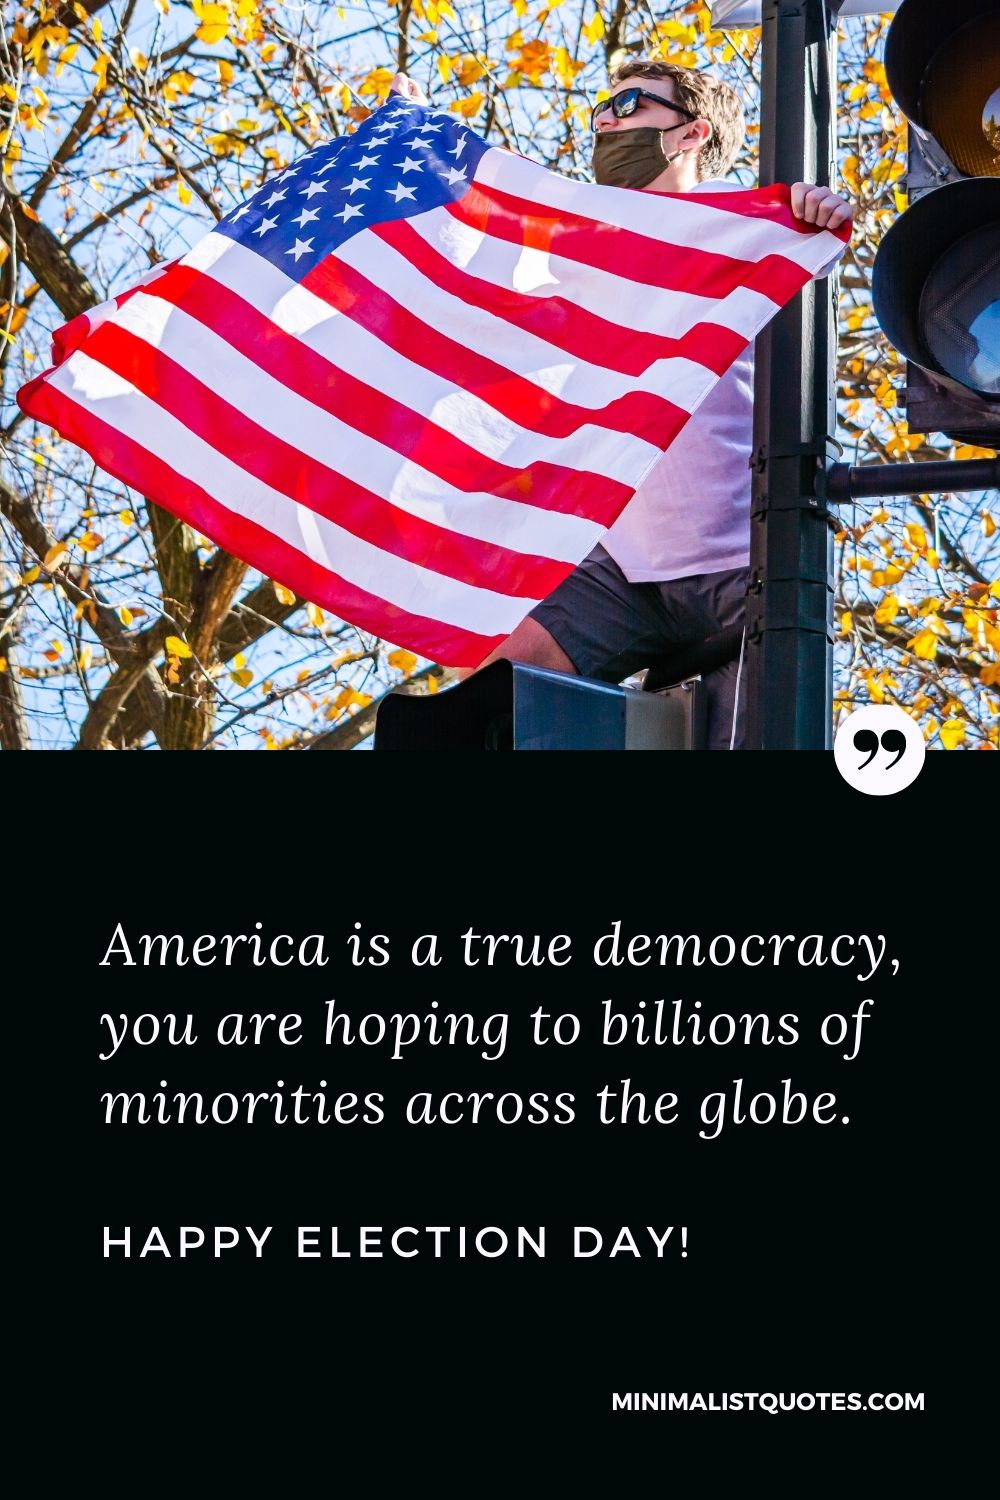 Election Day Quote, Wish & Message With Image: America is a true democracy, you are hoping to billions of minorities across the globe. Happy Election Day!